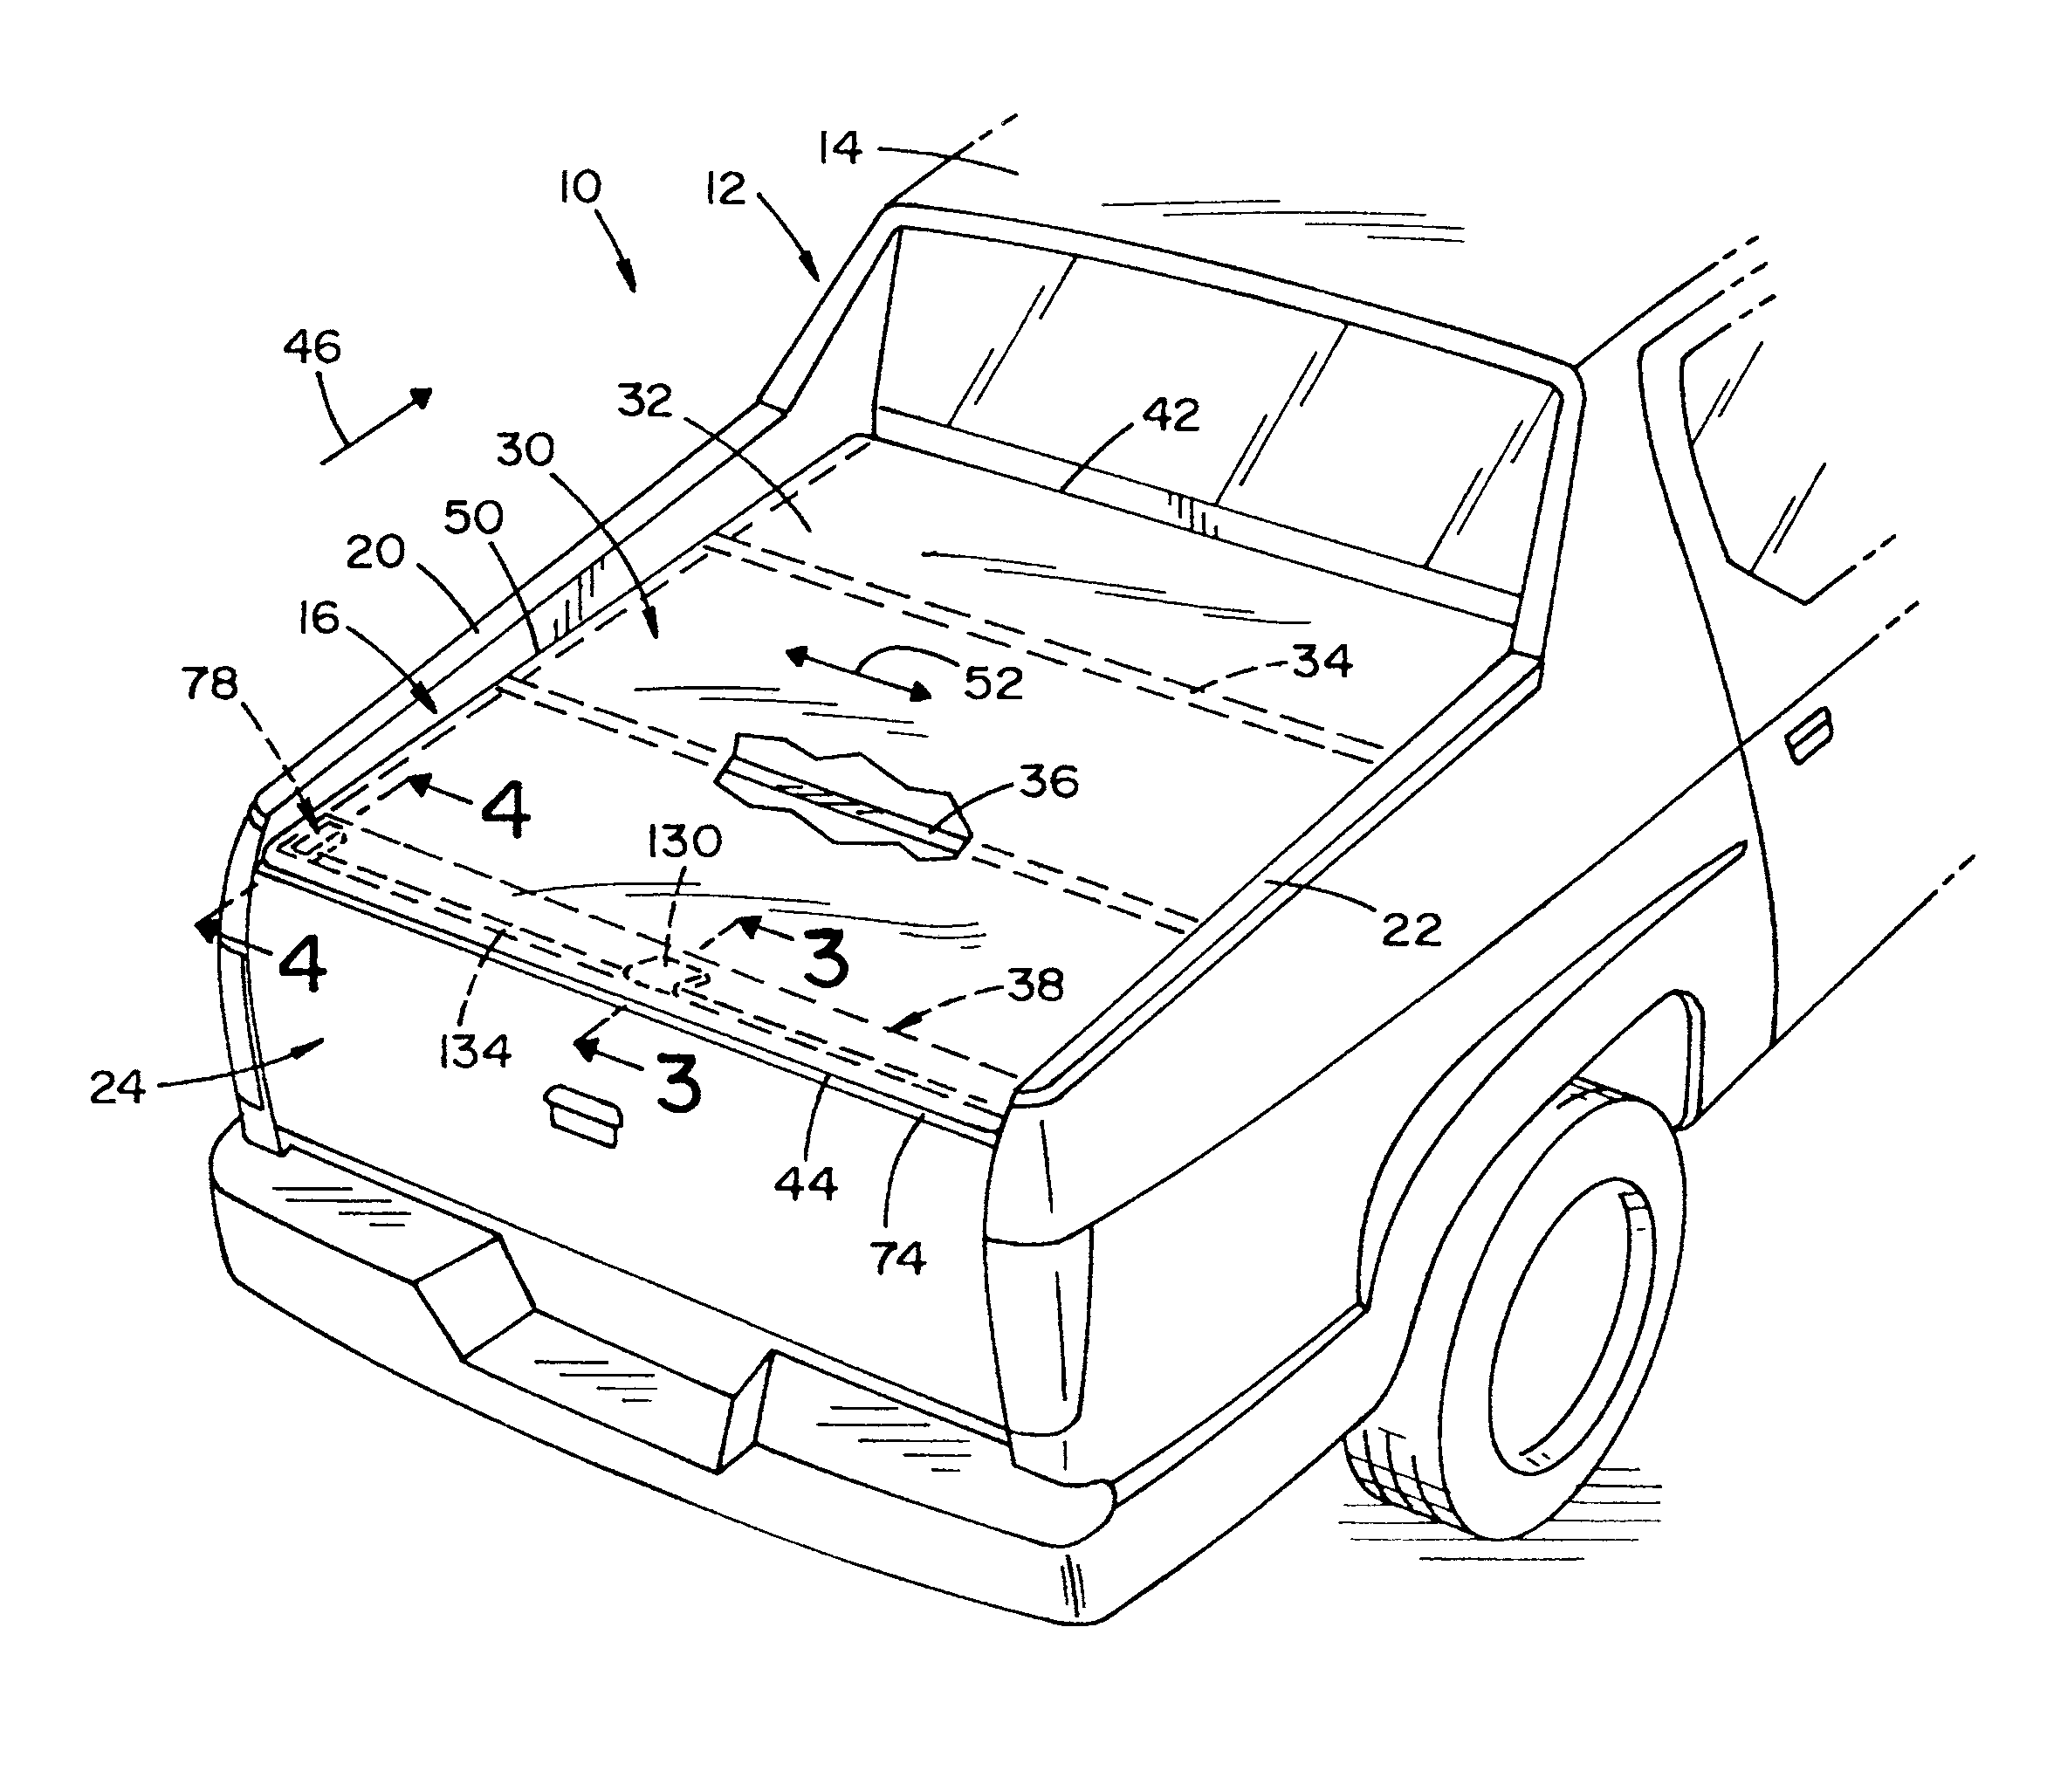 Tonneau cover assembly for a vehicle